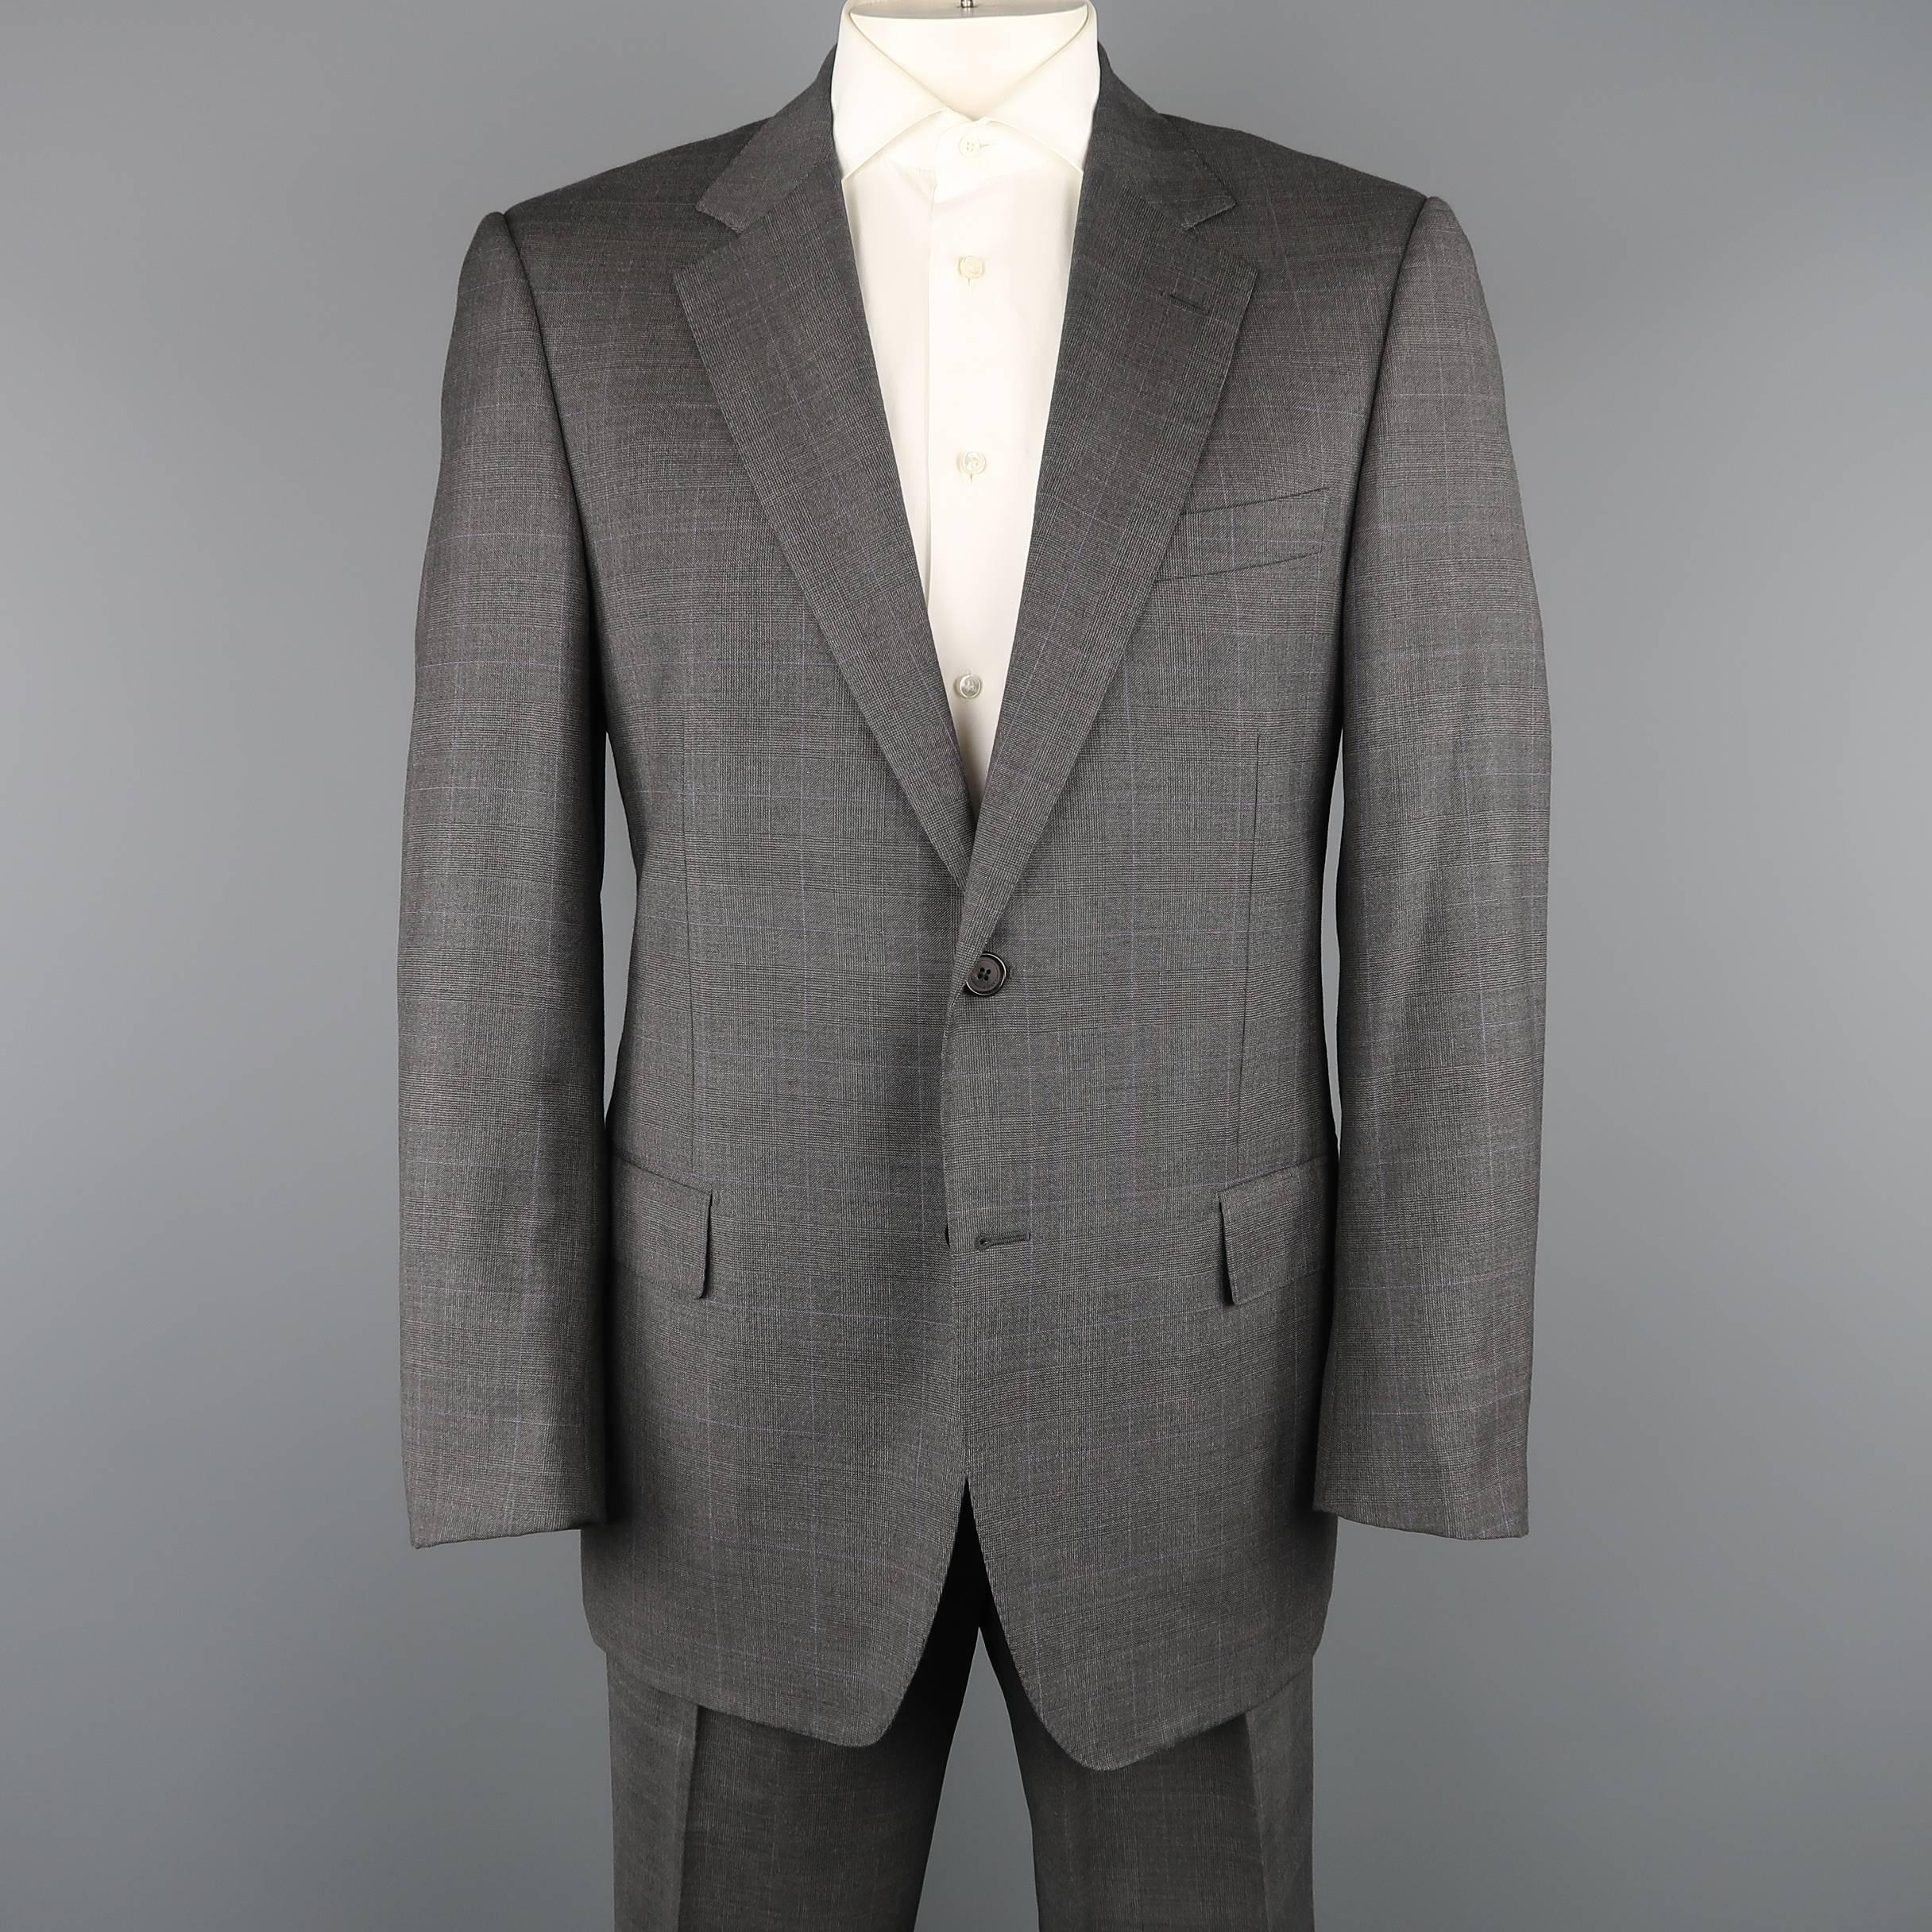 LANVIN suit comes in dark gray and lavender Glenplaid wool with and includes a single breasted, two button notch lapel, two button sport coat and matching single pleated trousers. Made in Italy.
 
Good Pre-Owned Condition.
Marked: IT 52
